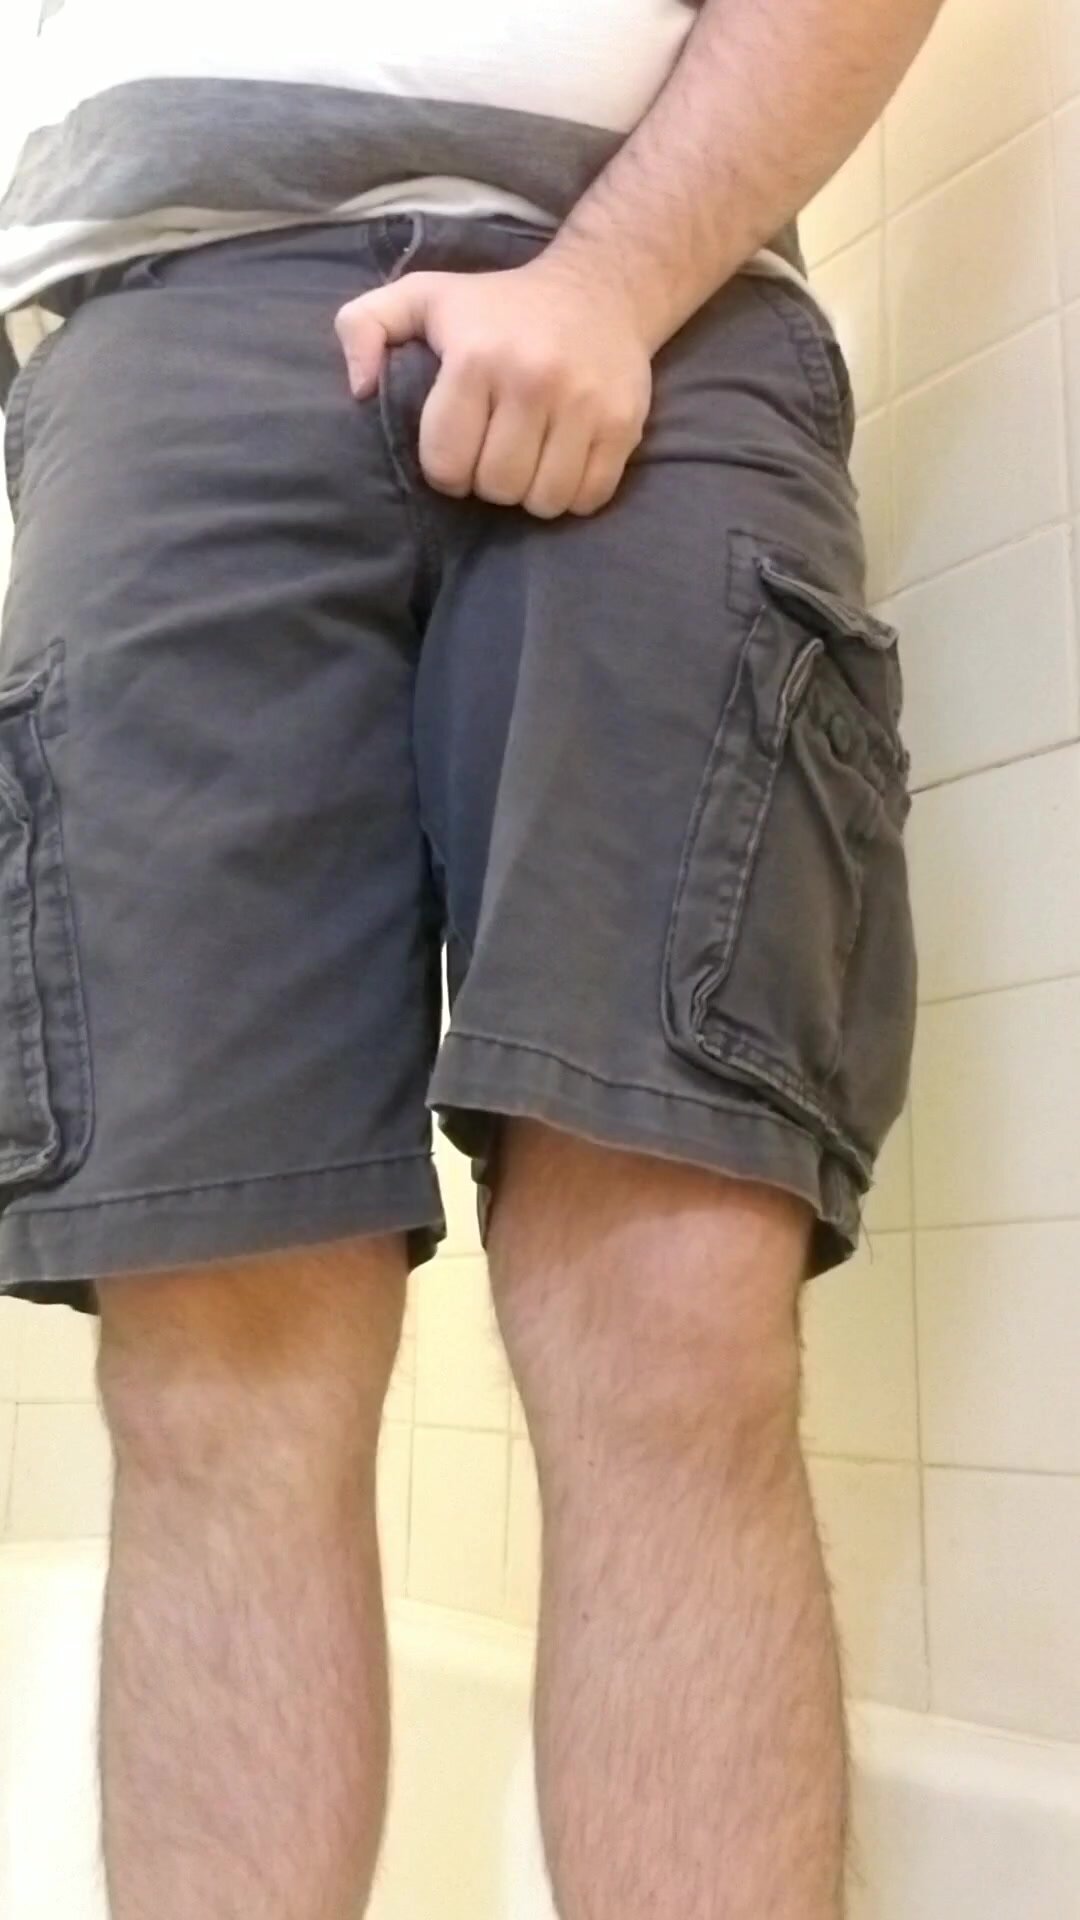 pissing shorts and briefs